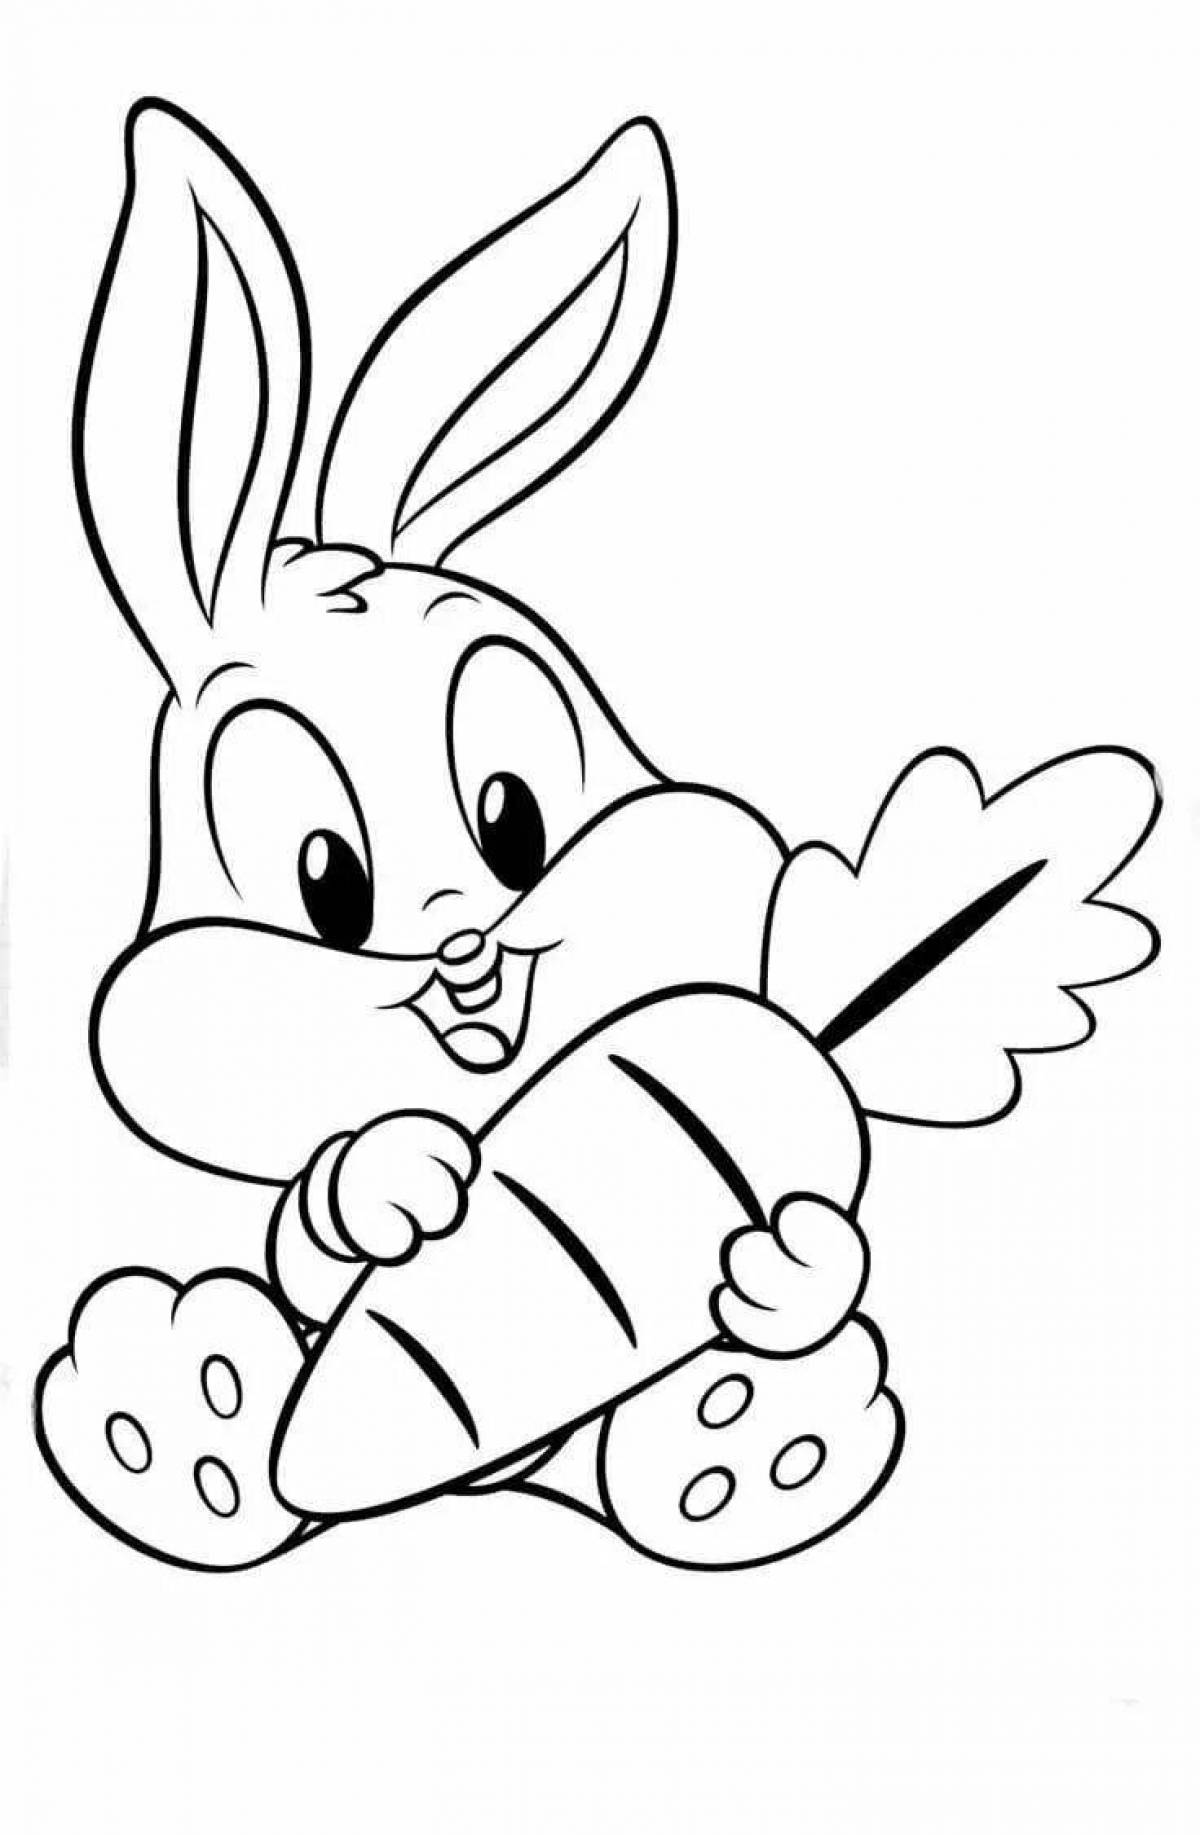 Wiggly baby bunny coloring page